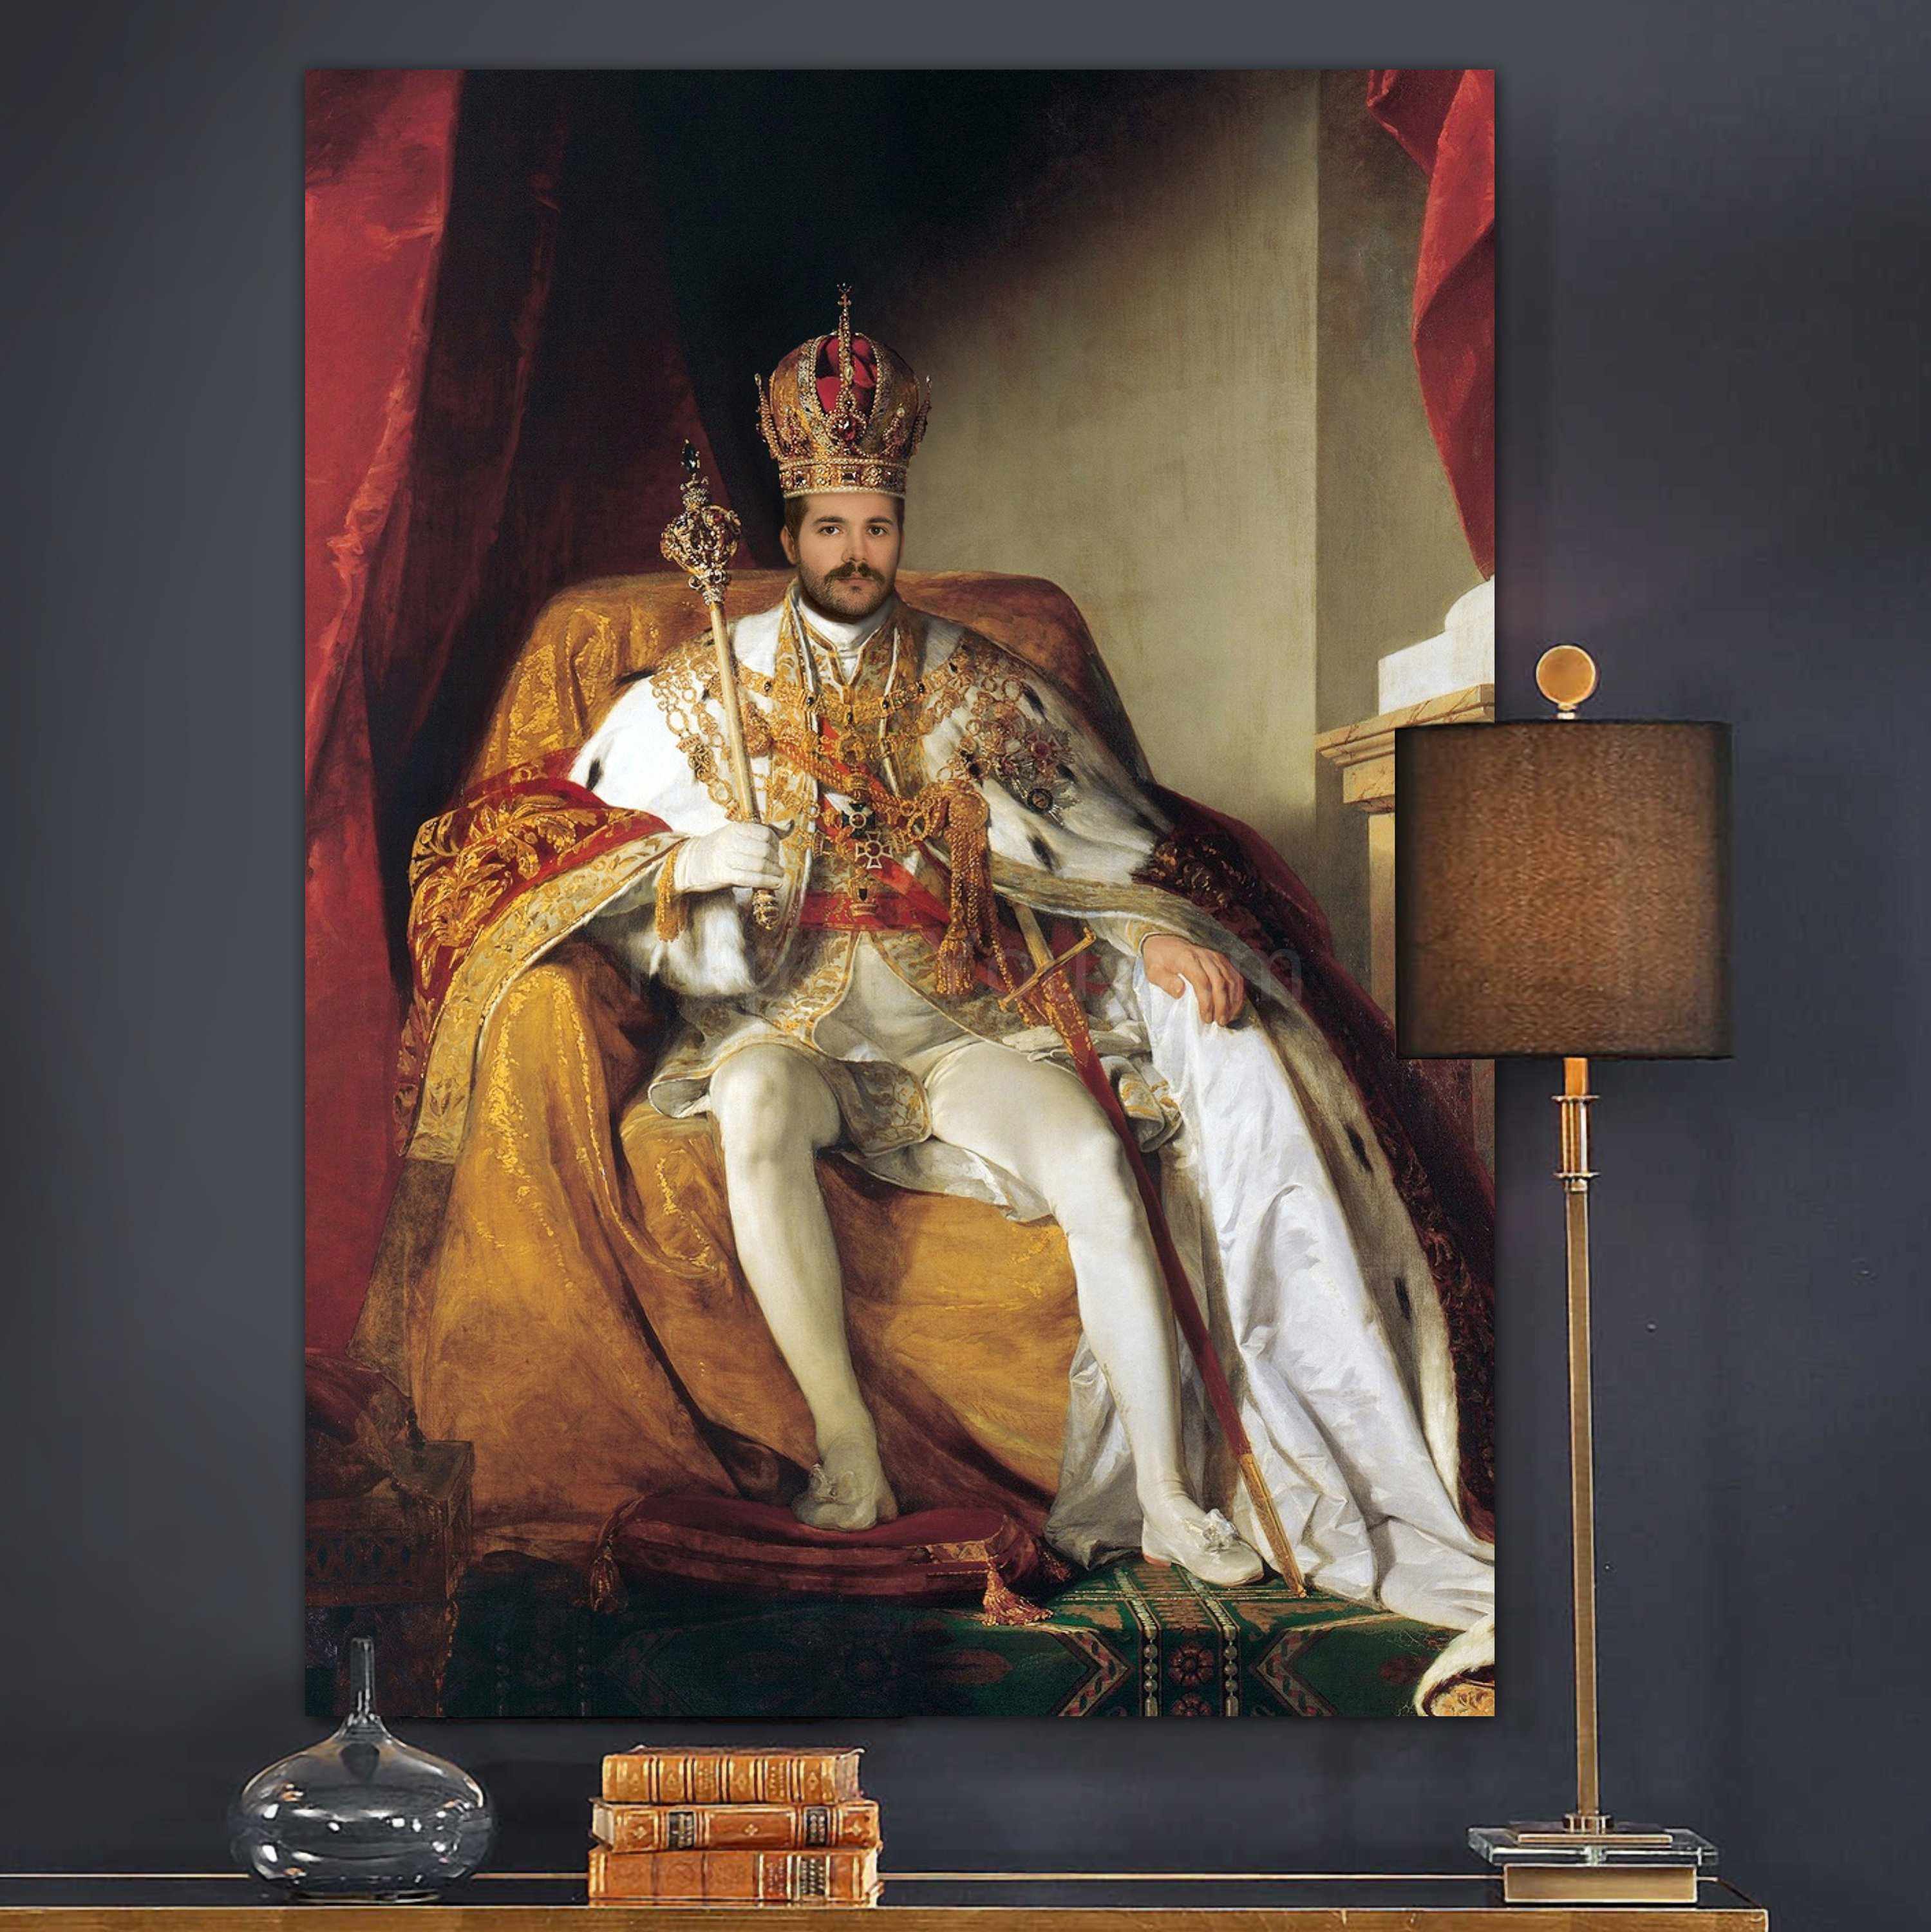 On the gray wall next to the floor lamp hangs a portrait of a man dressed in a royal costume